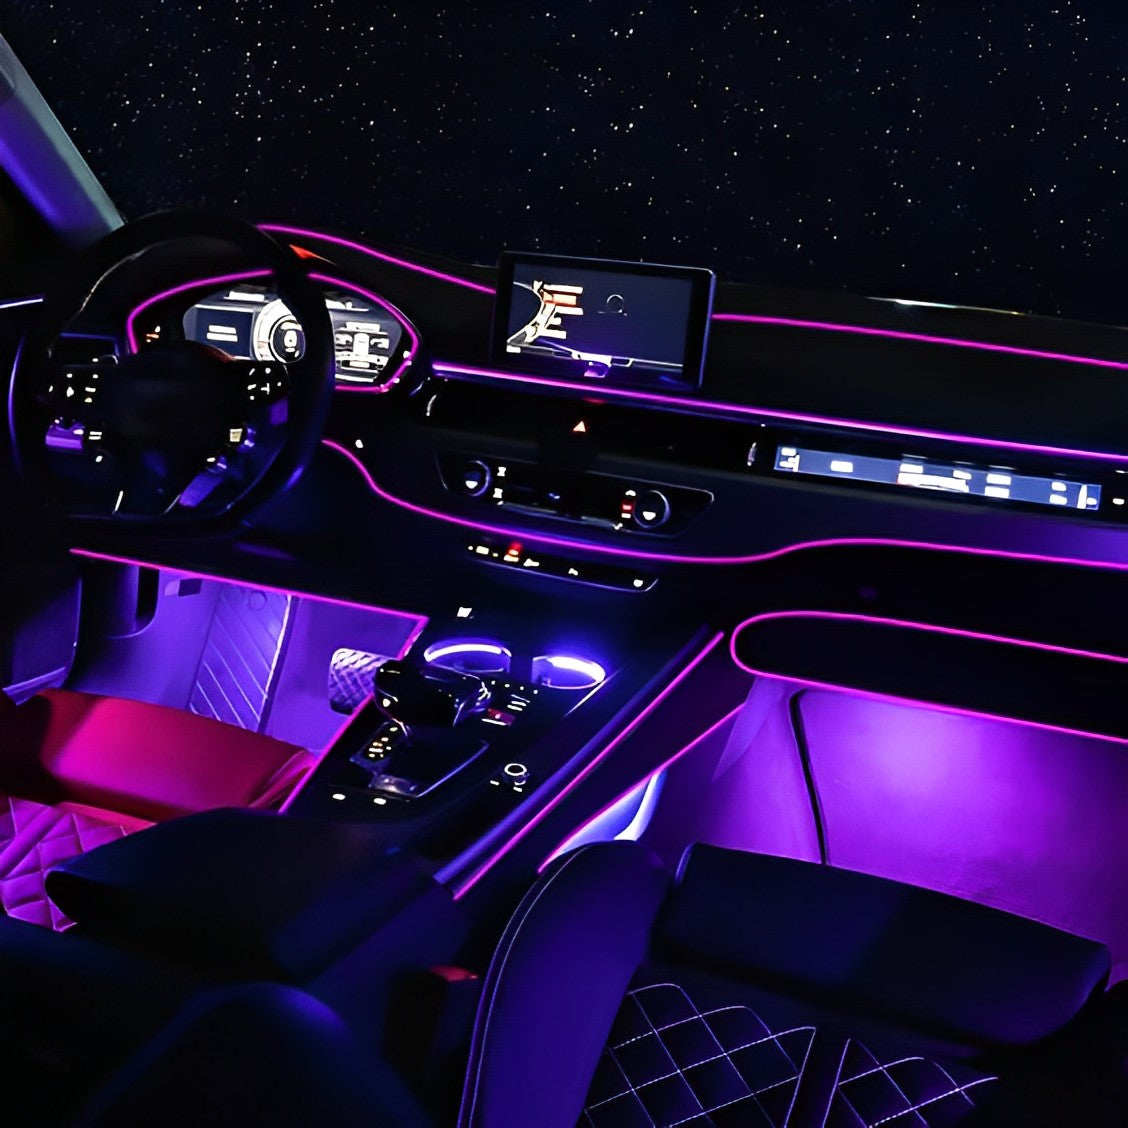 5 in1 Cool Car Interior Ambient Lighting